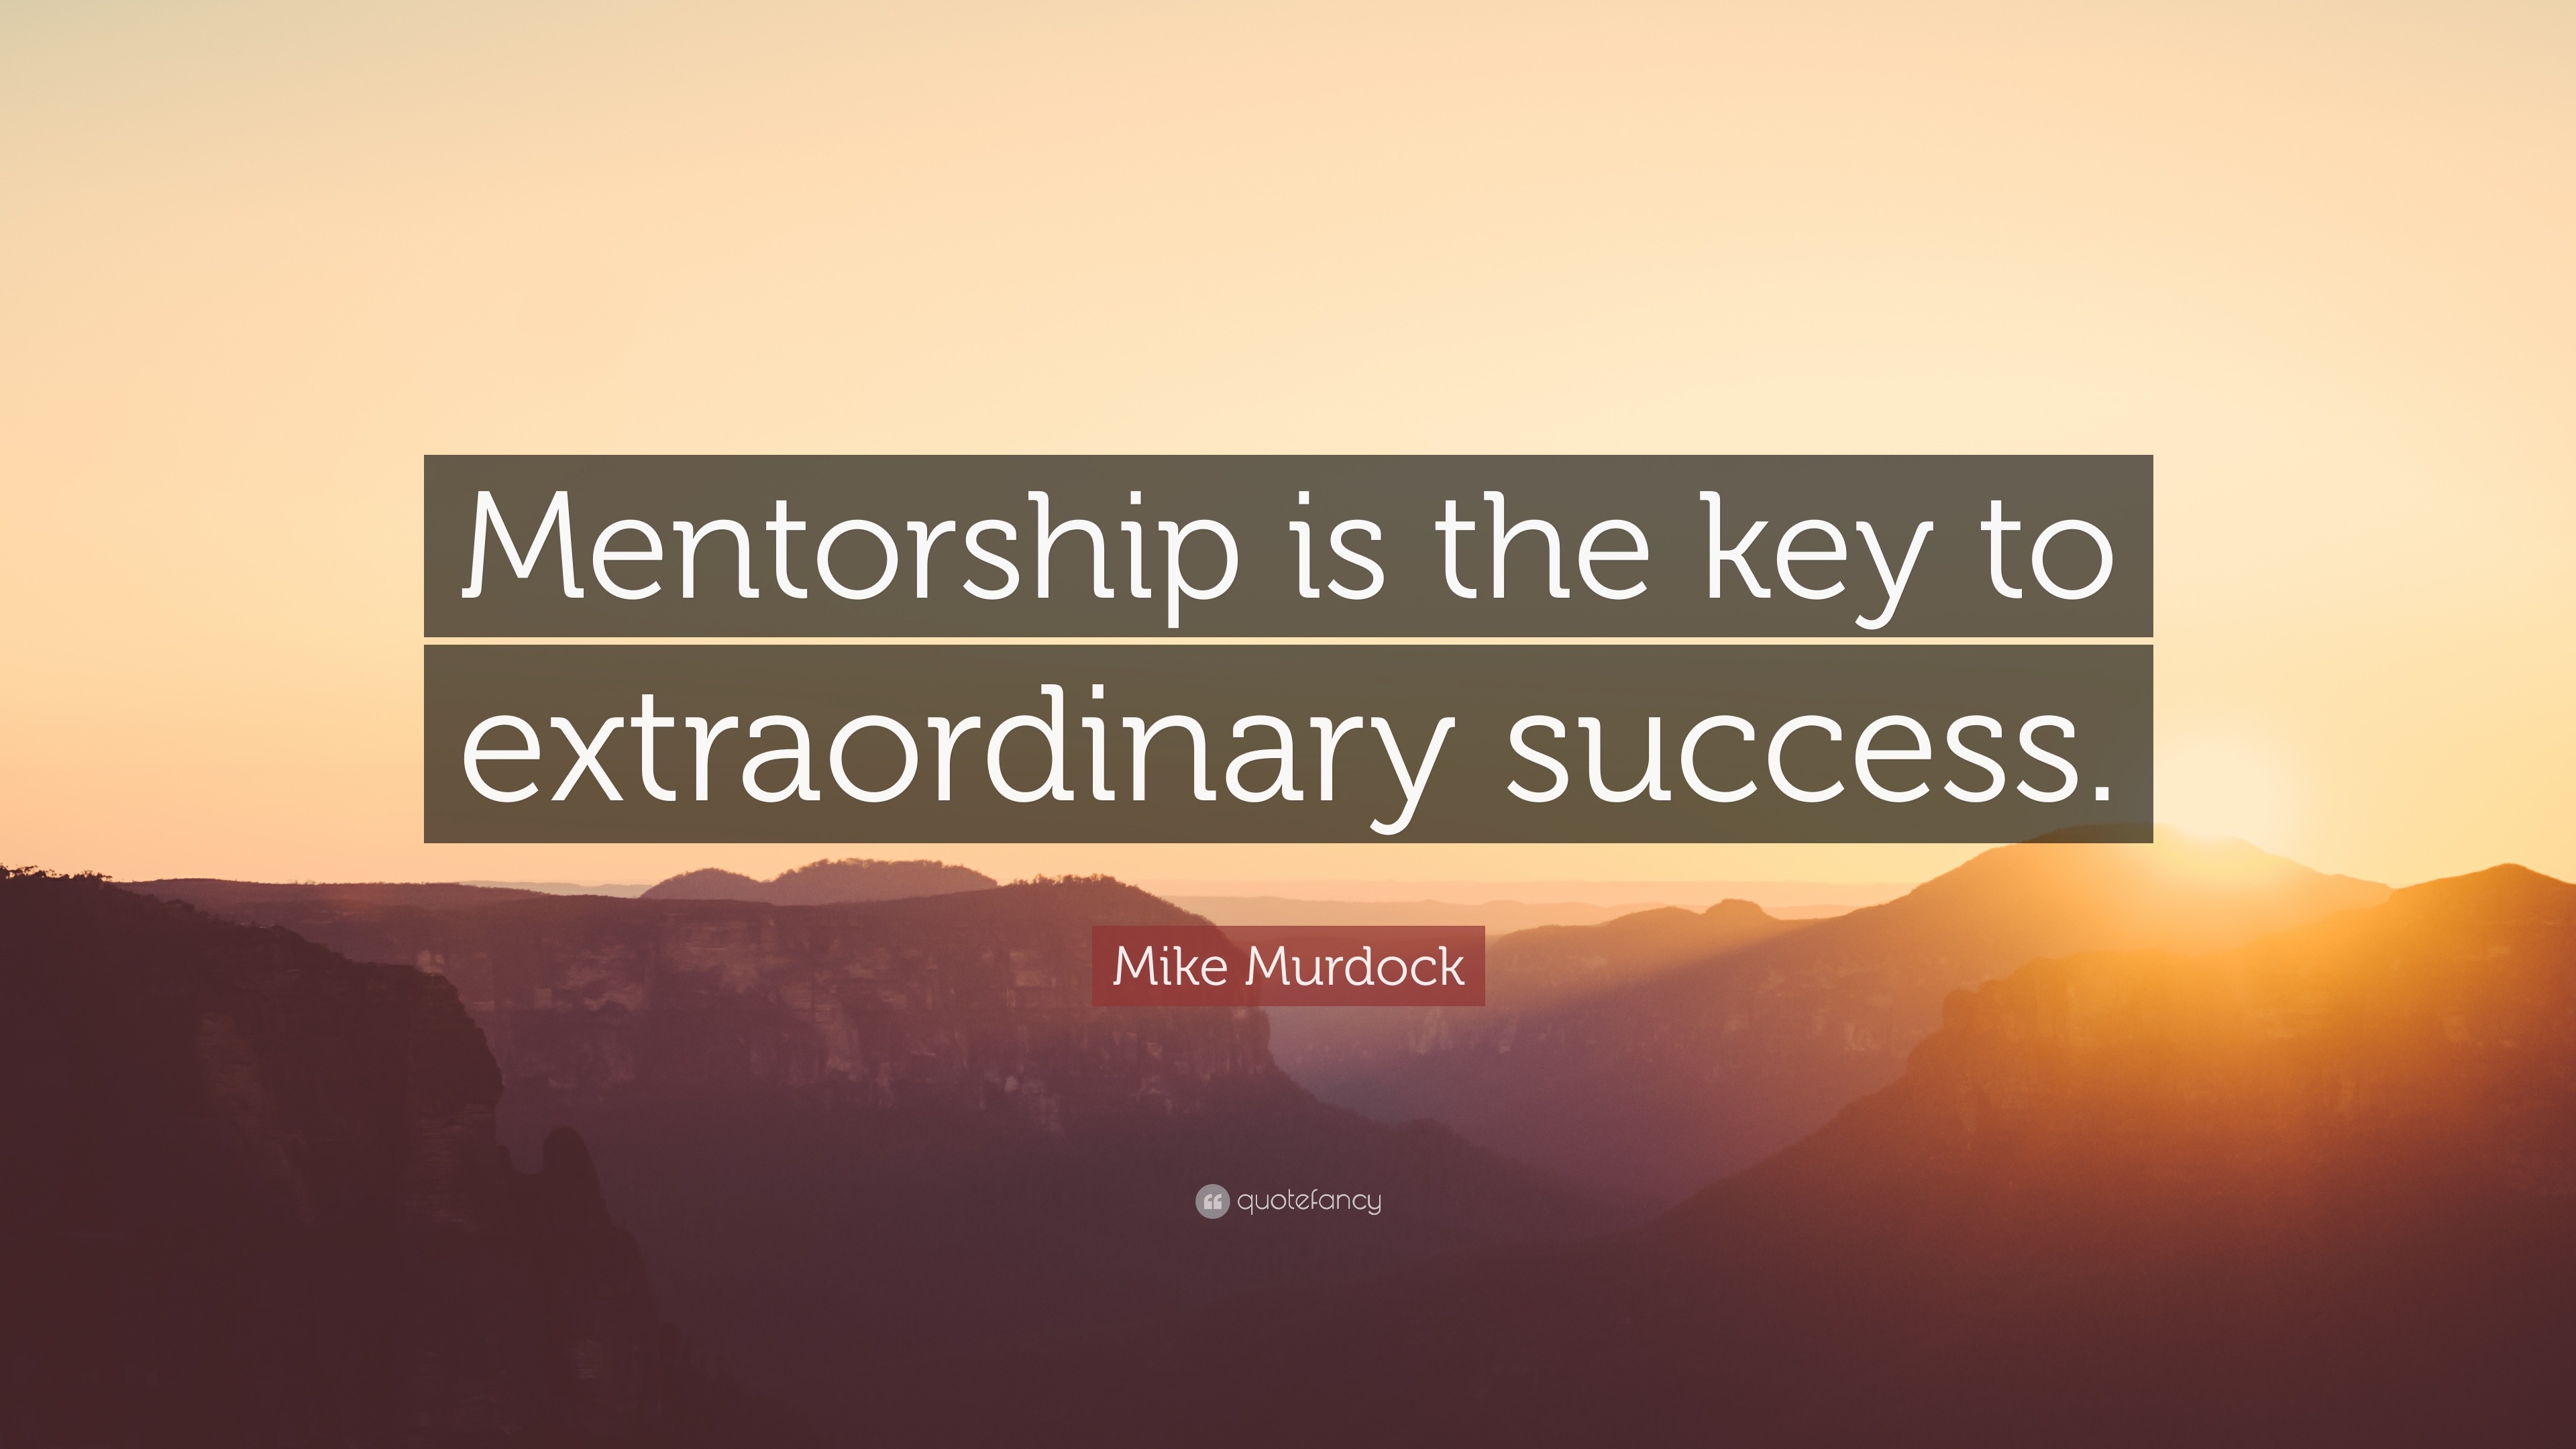 Mike Murdock Quote “Mentorship is the key to